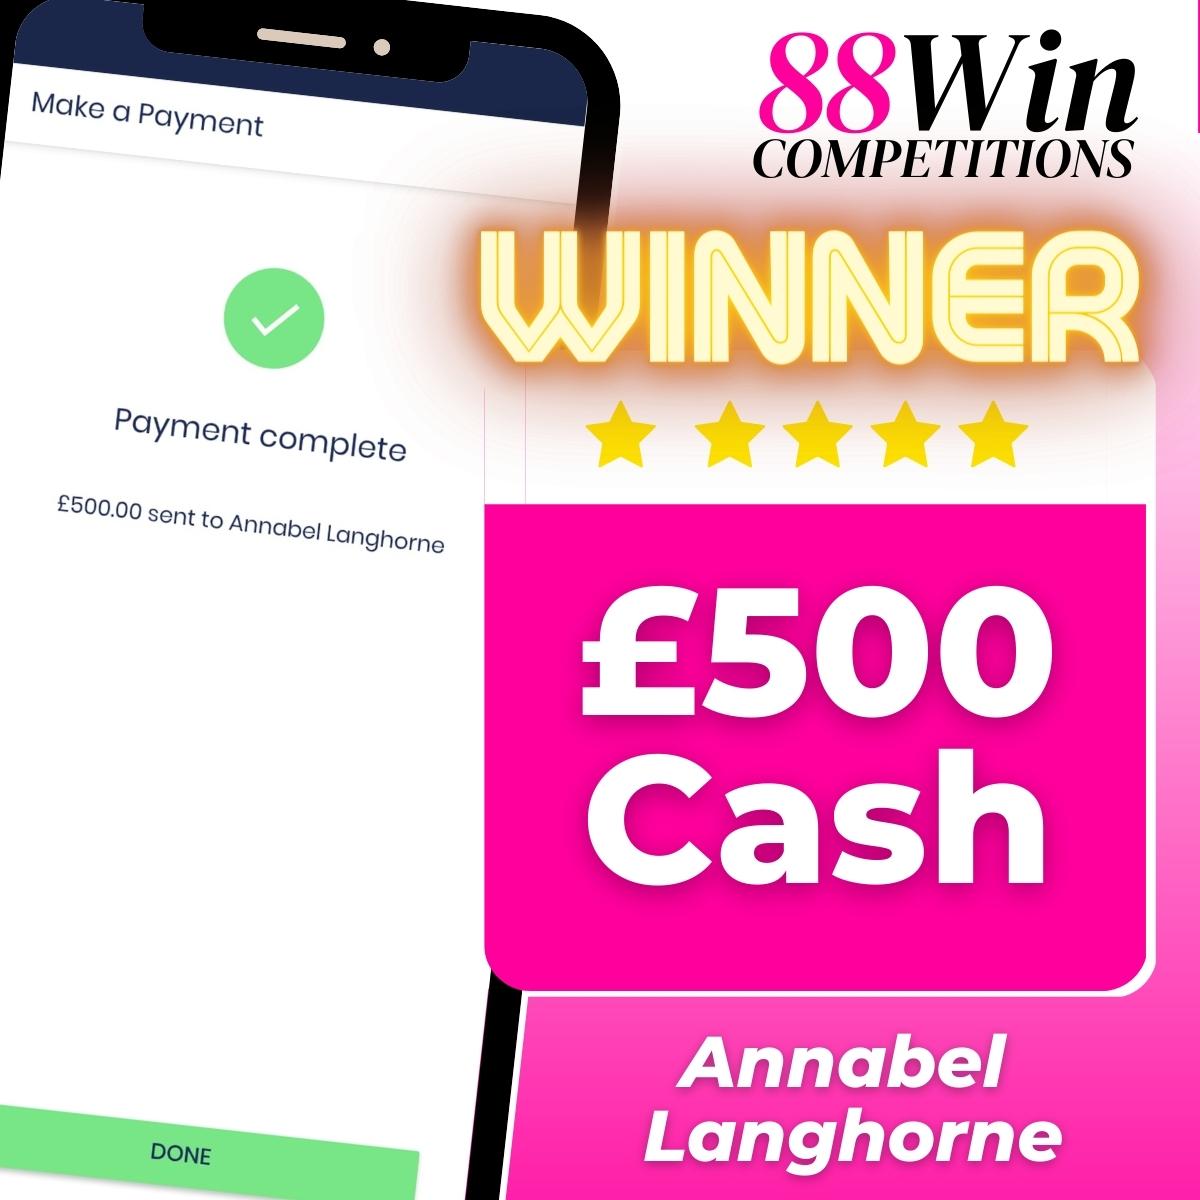 88Win Competitions £500 Winner Photo